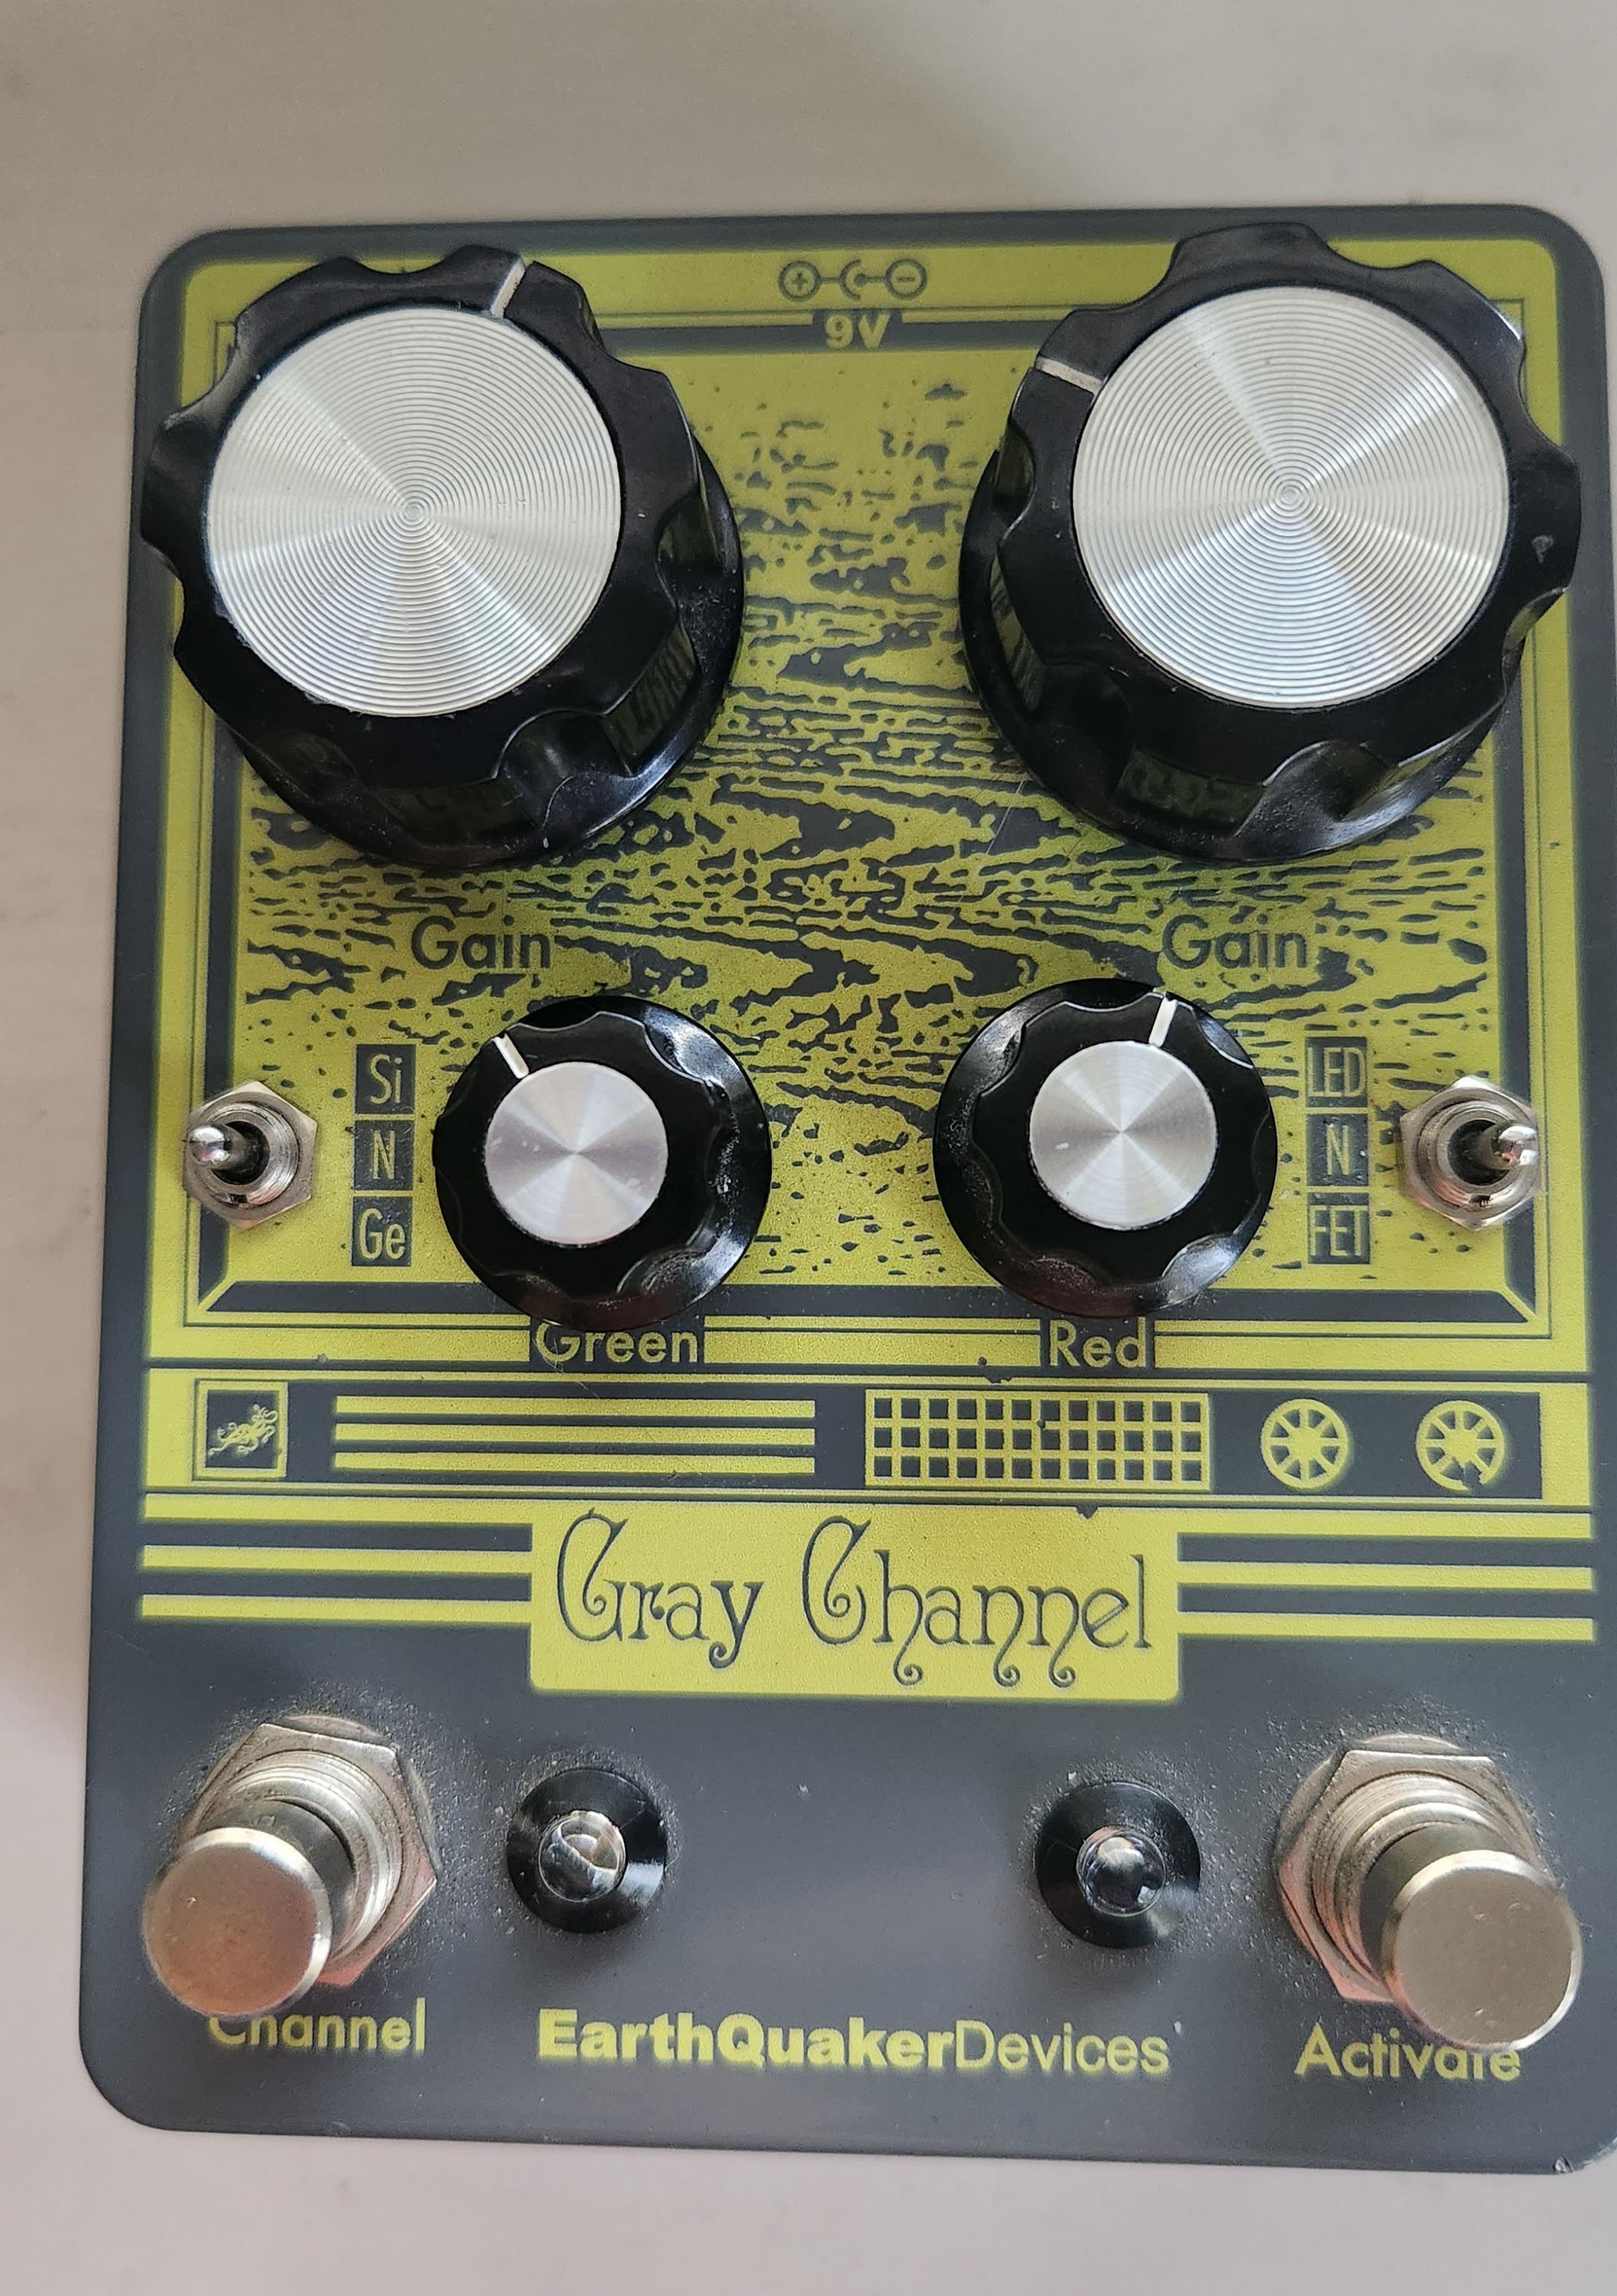 Used EarthQuaker Devices Grey Channel EQD - Sweetwater's Gear Exchange